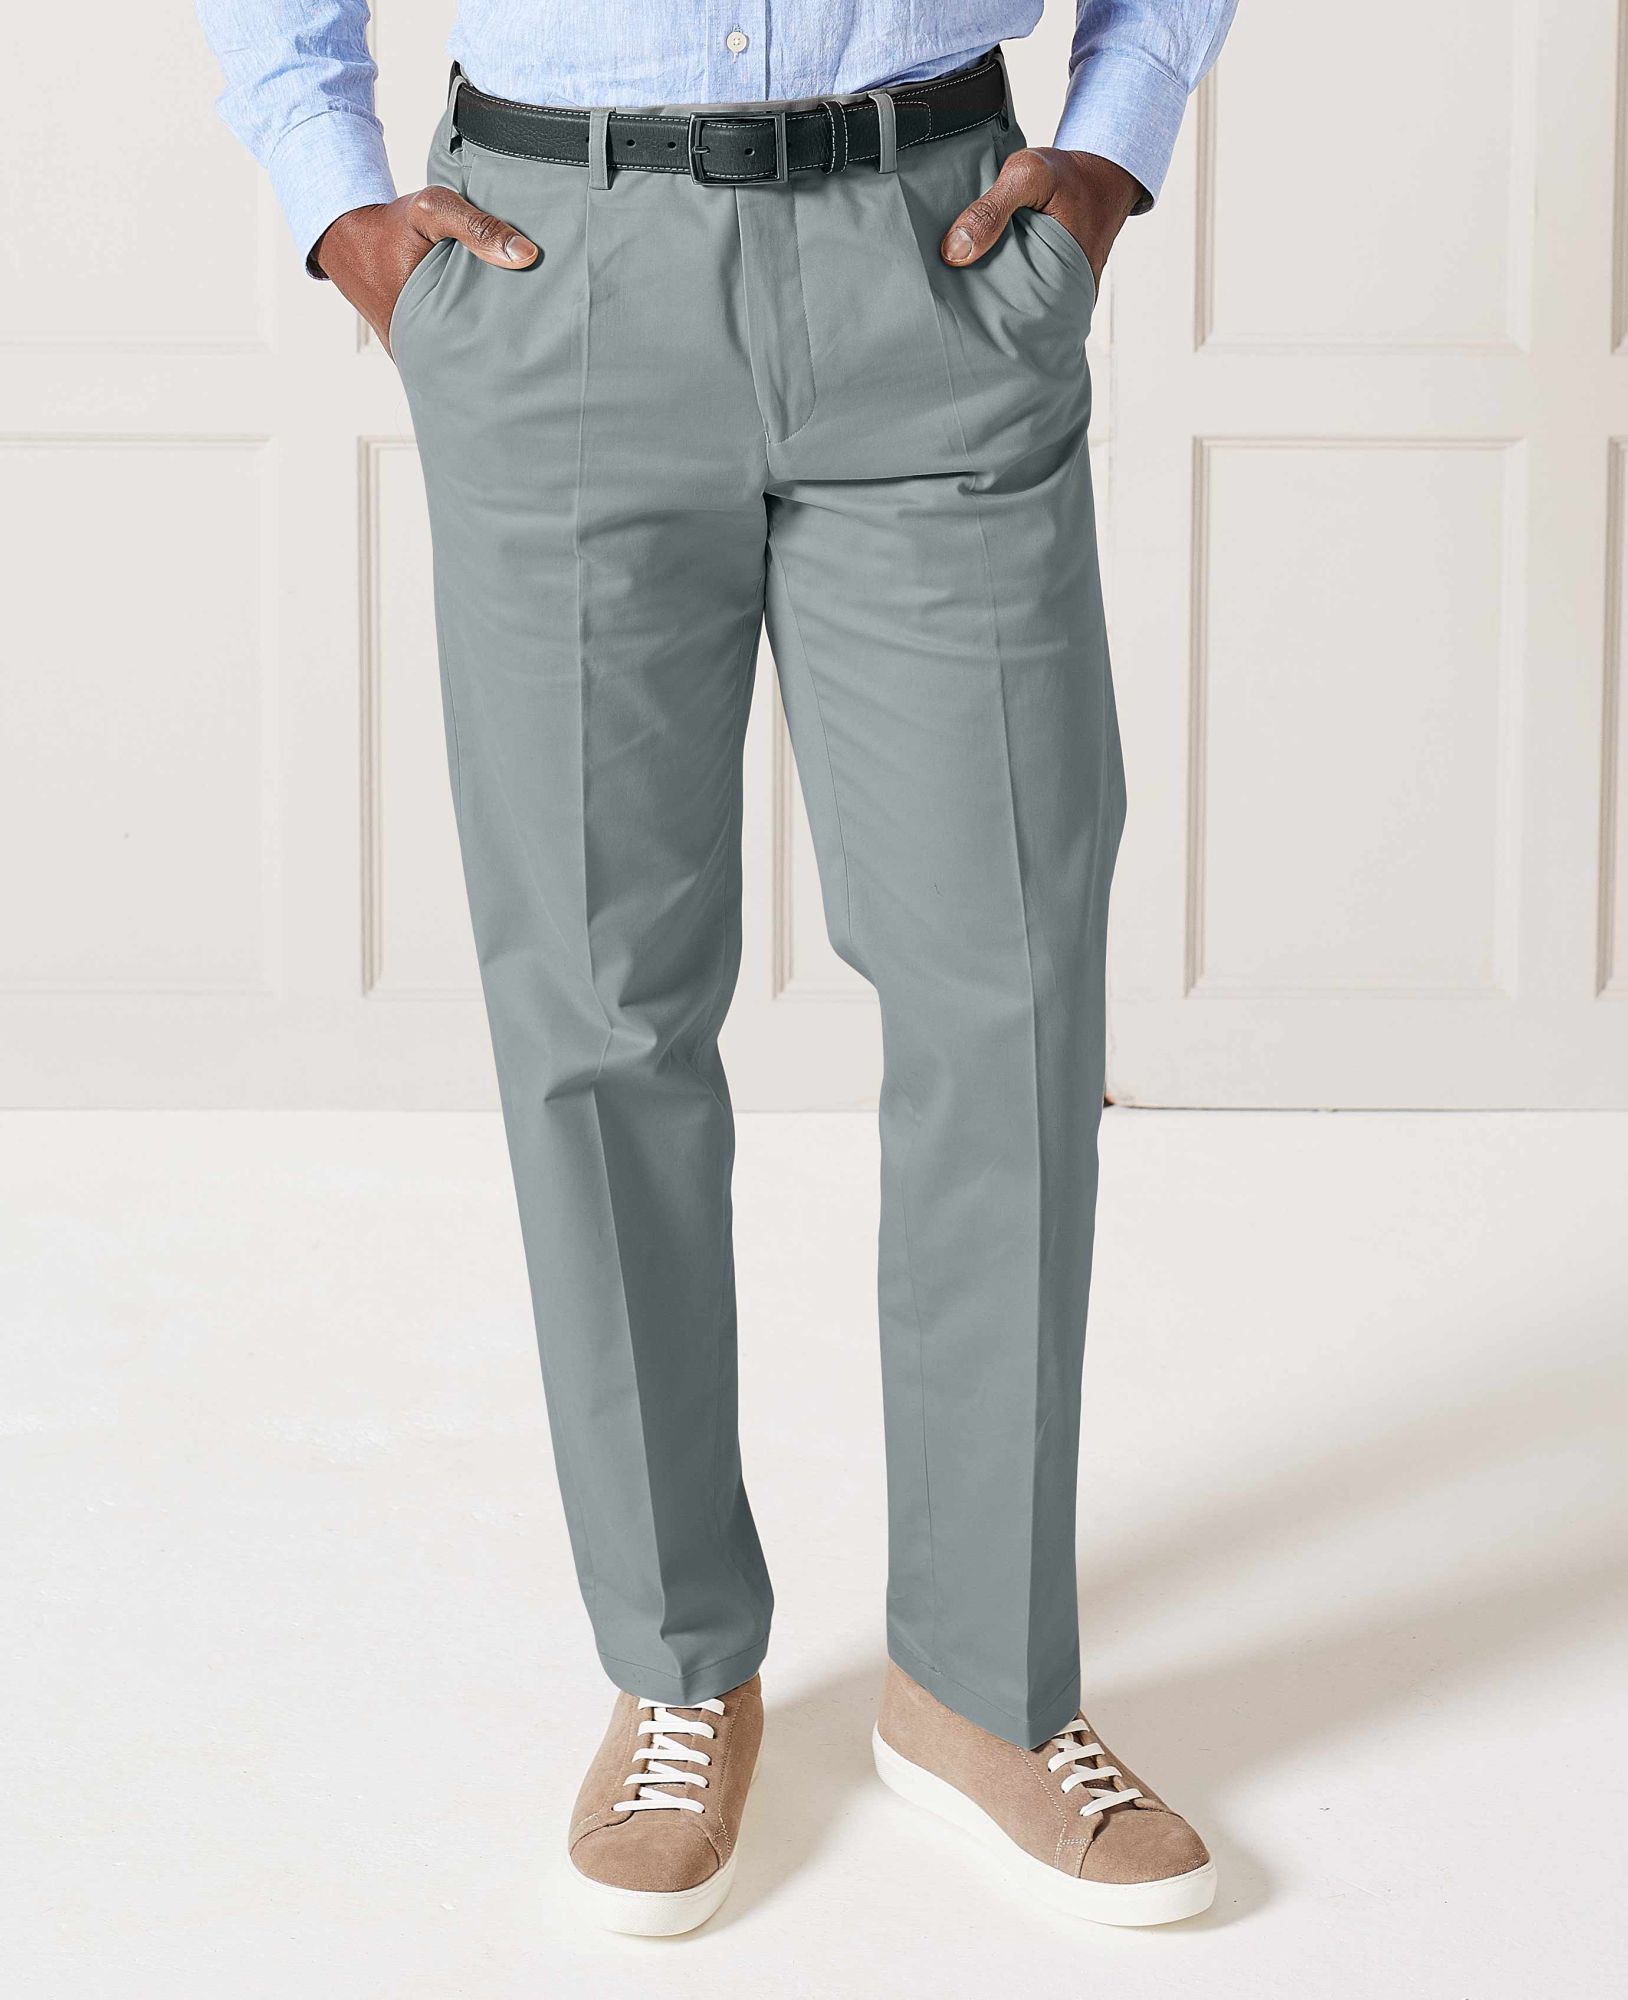 Grey Pleat Front Stretch Cotton Classic Fit Chinos 36